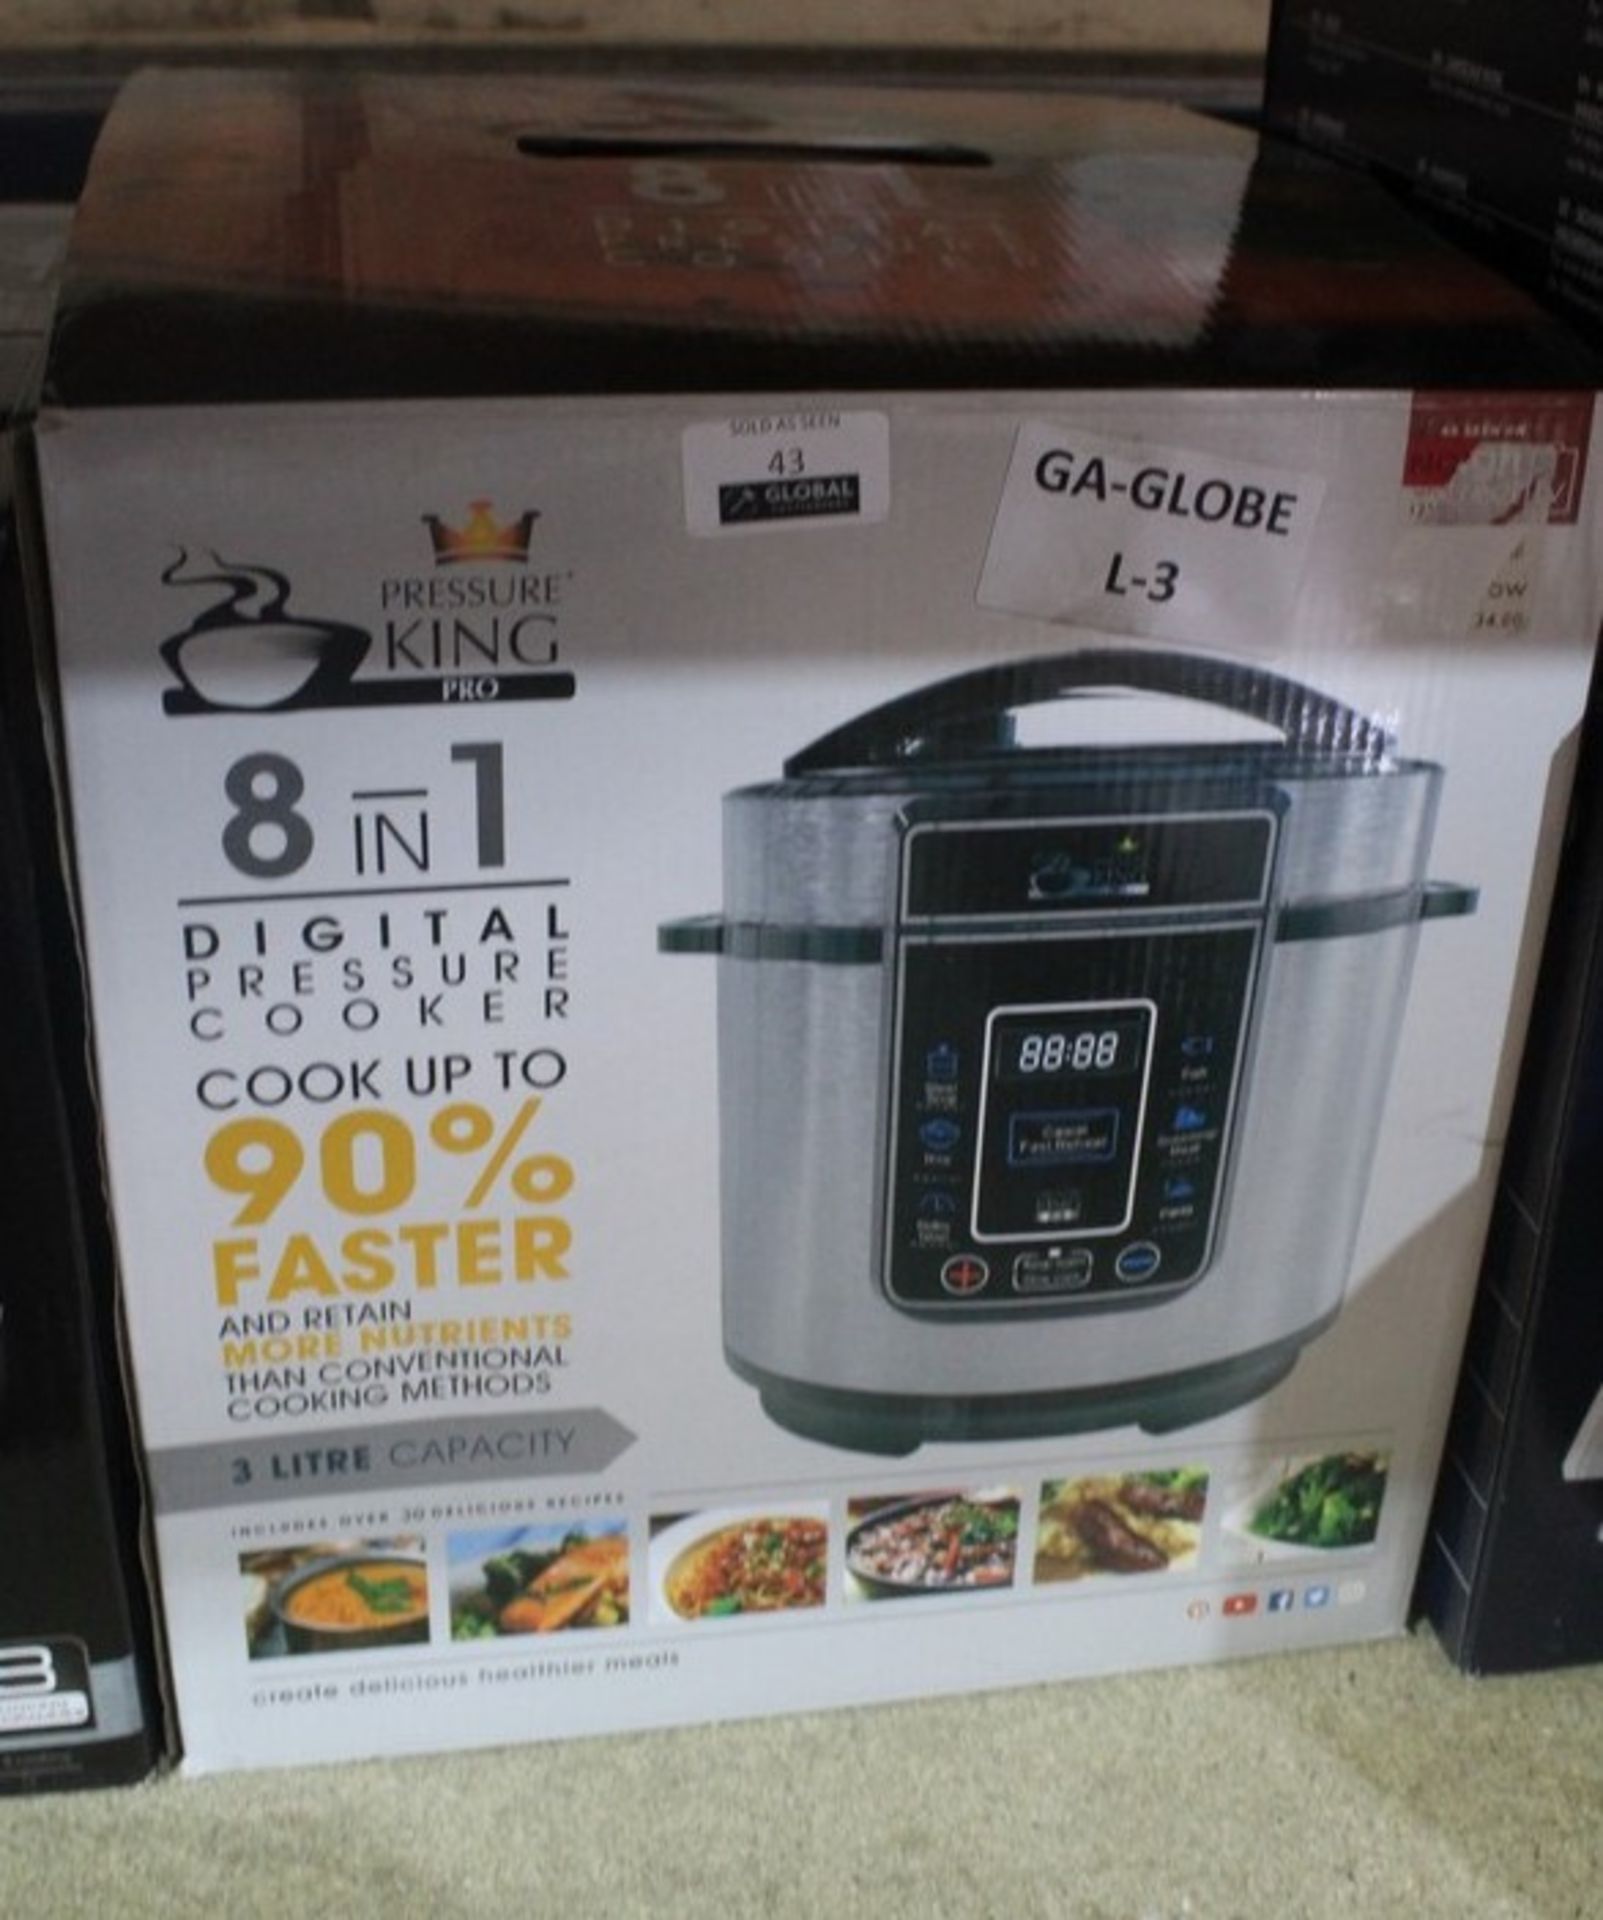 Boxed Pressure King Pro 8 in 1 Digital Pressure Cooker RRP £55 (Appraisals Available Upon